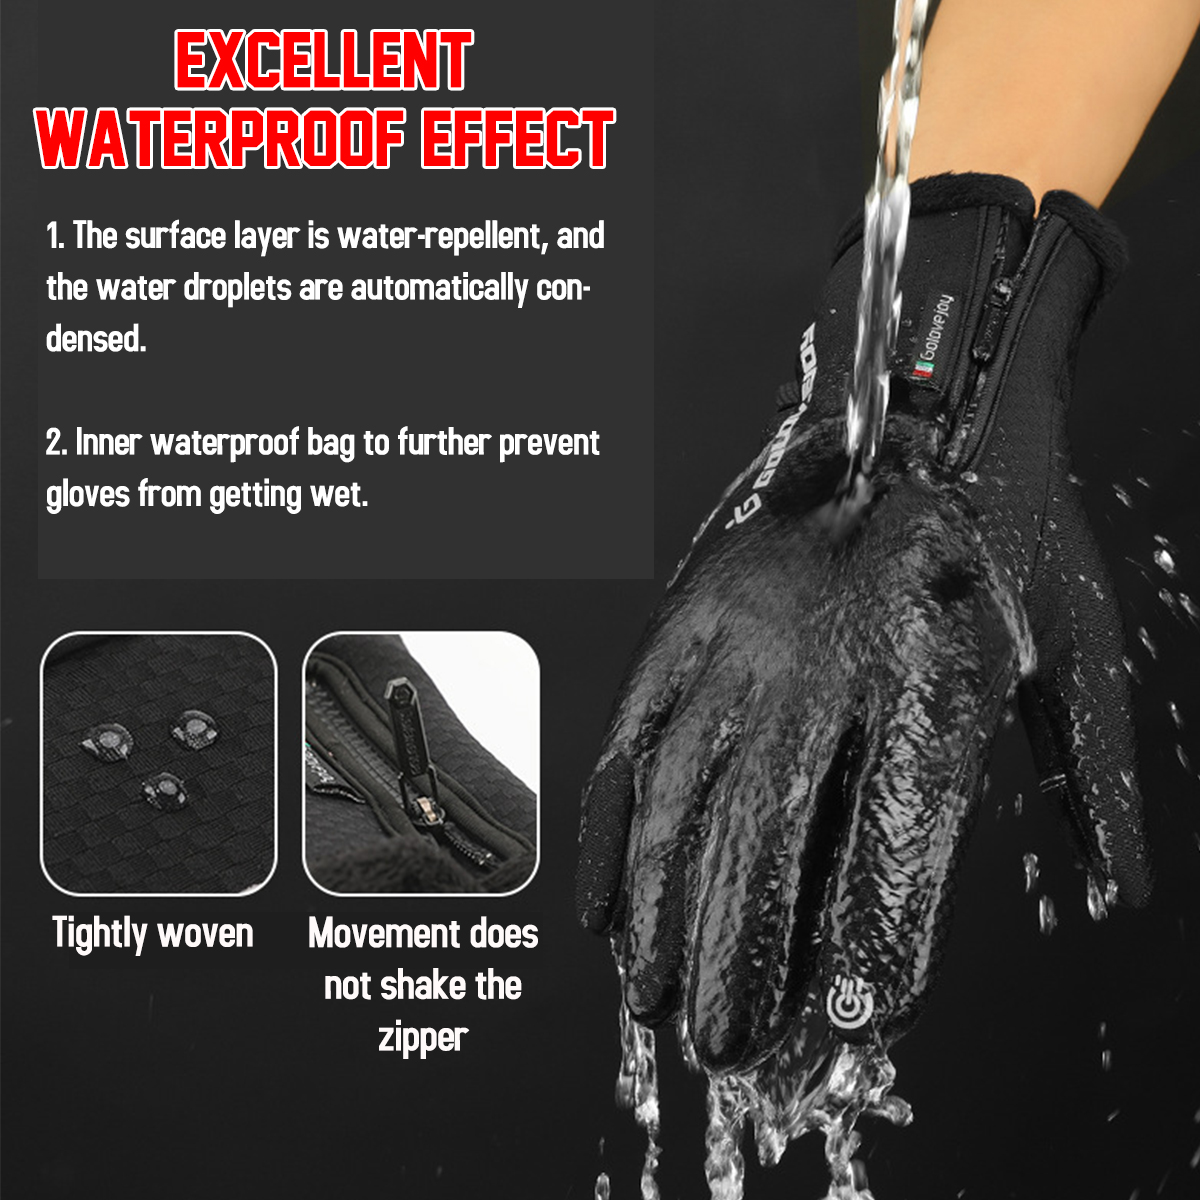 Windstopers-Skiing-Gloves-Anti-Slip-Touchscreen-Breathable-Water-Repellent-Zipper-Warm-Glove-1580293-2